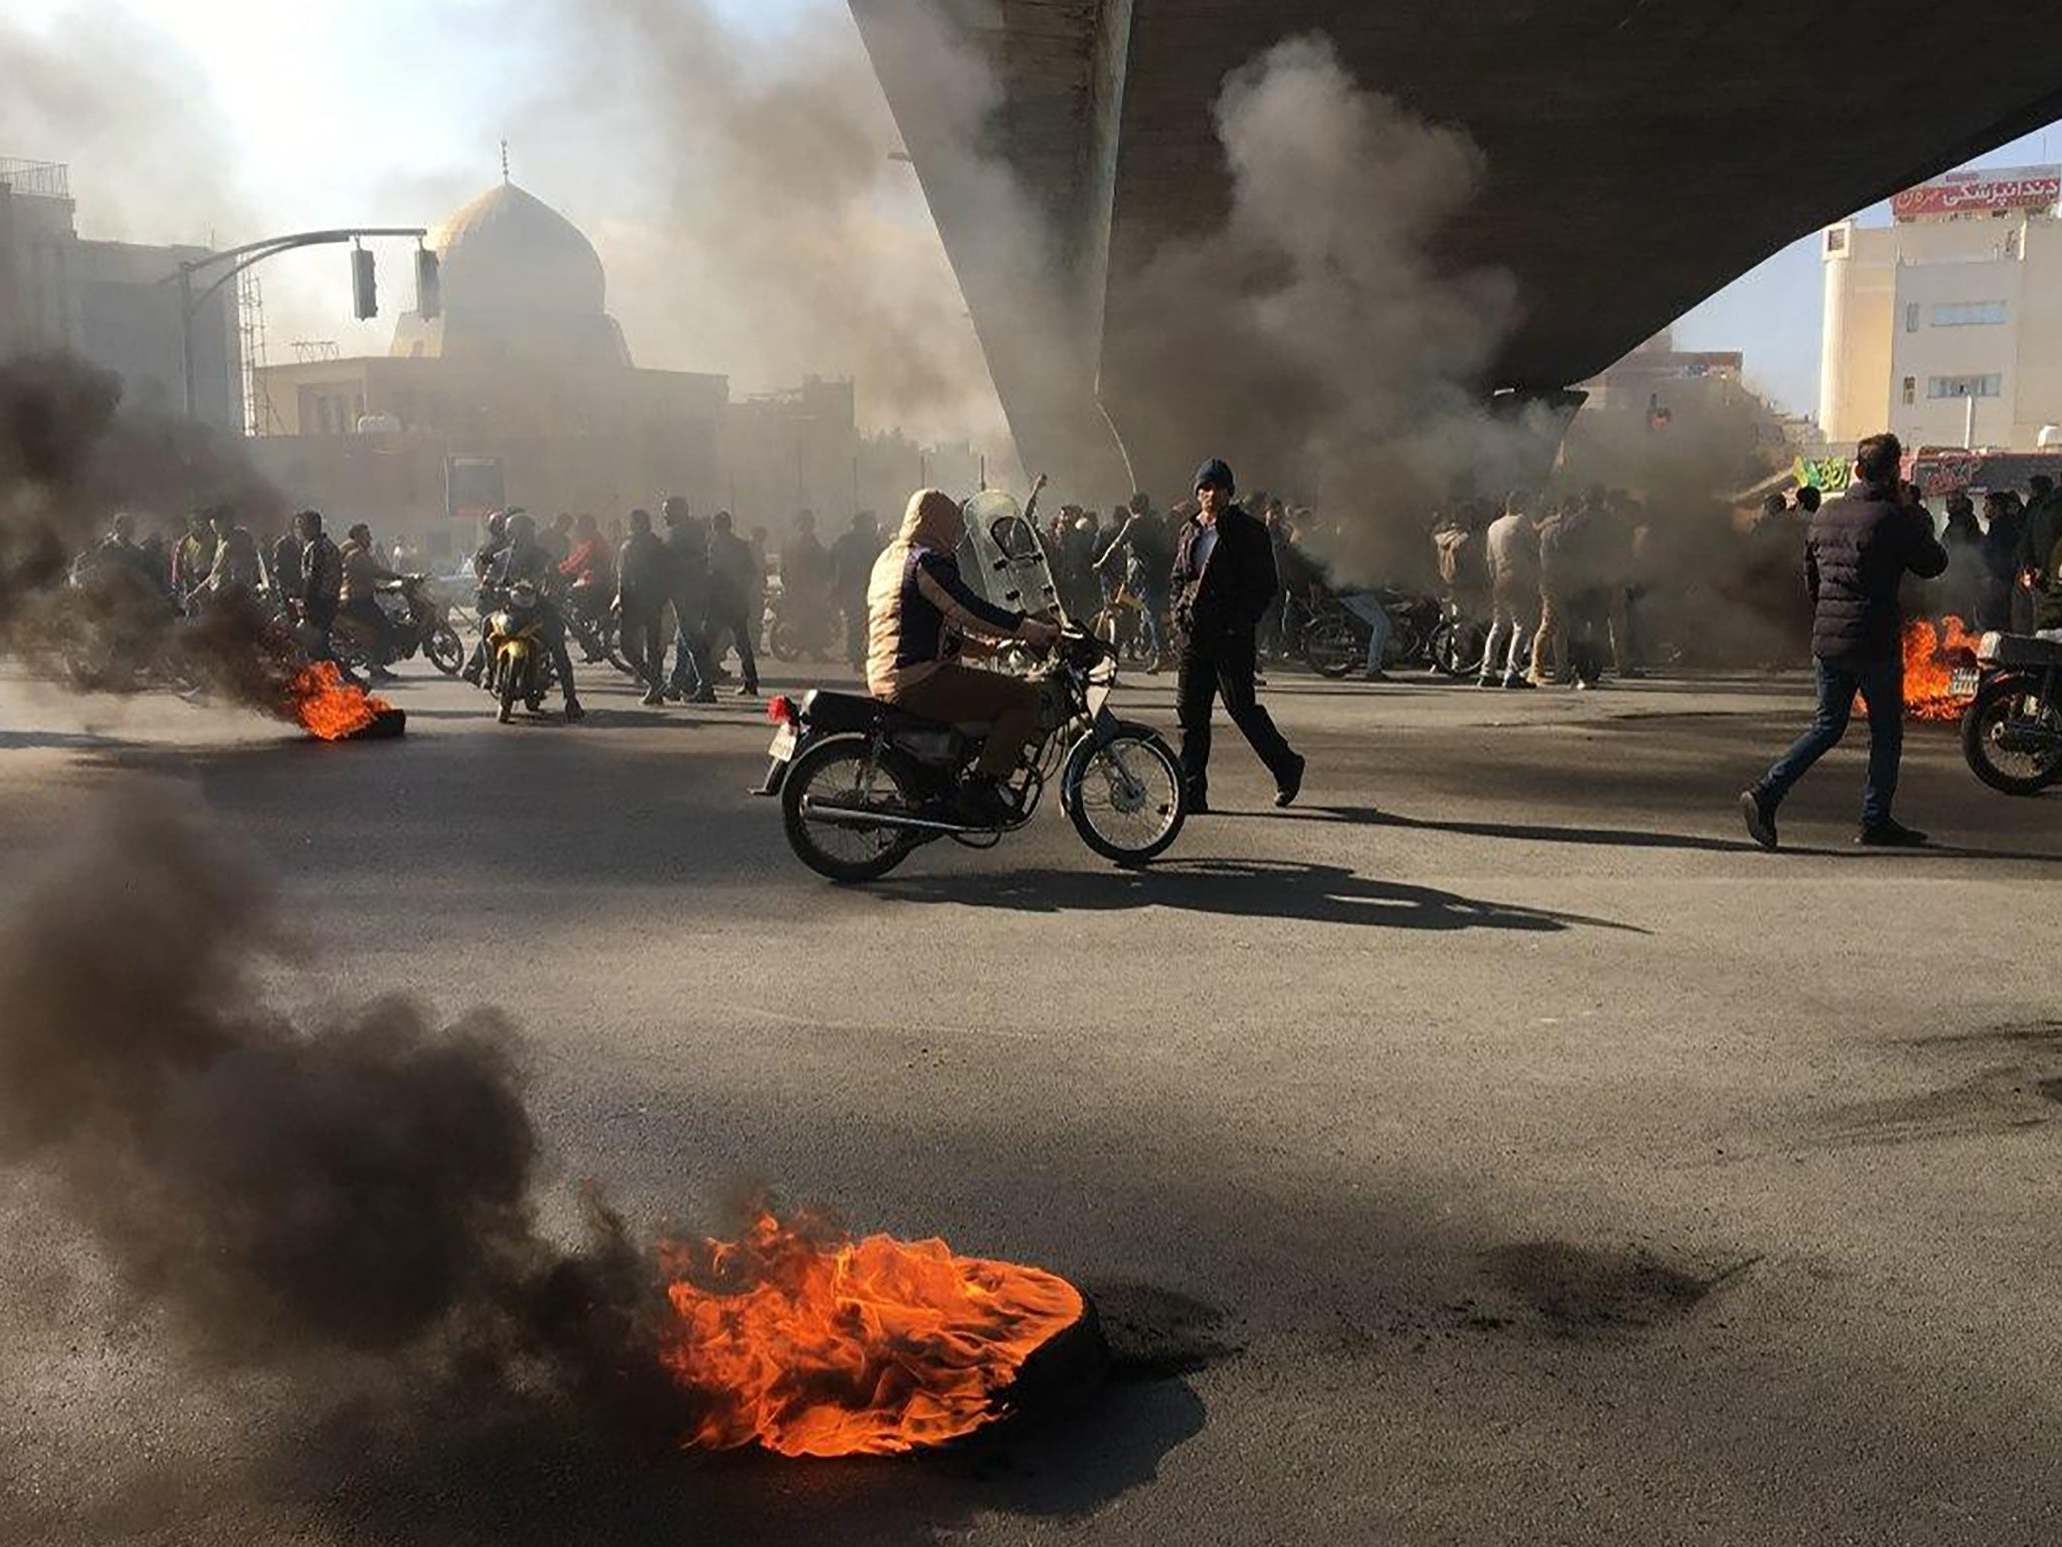 Iranian protesters rally amid burning tires during a demonstration in the central city of Isfahan on November 2019